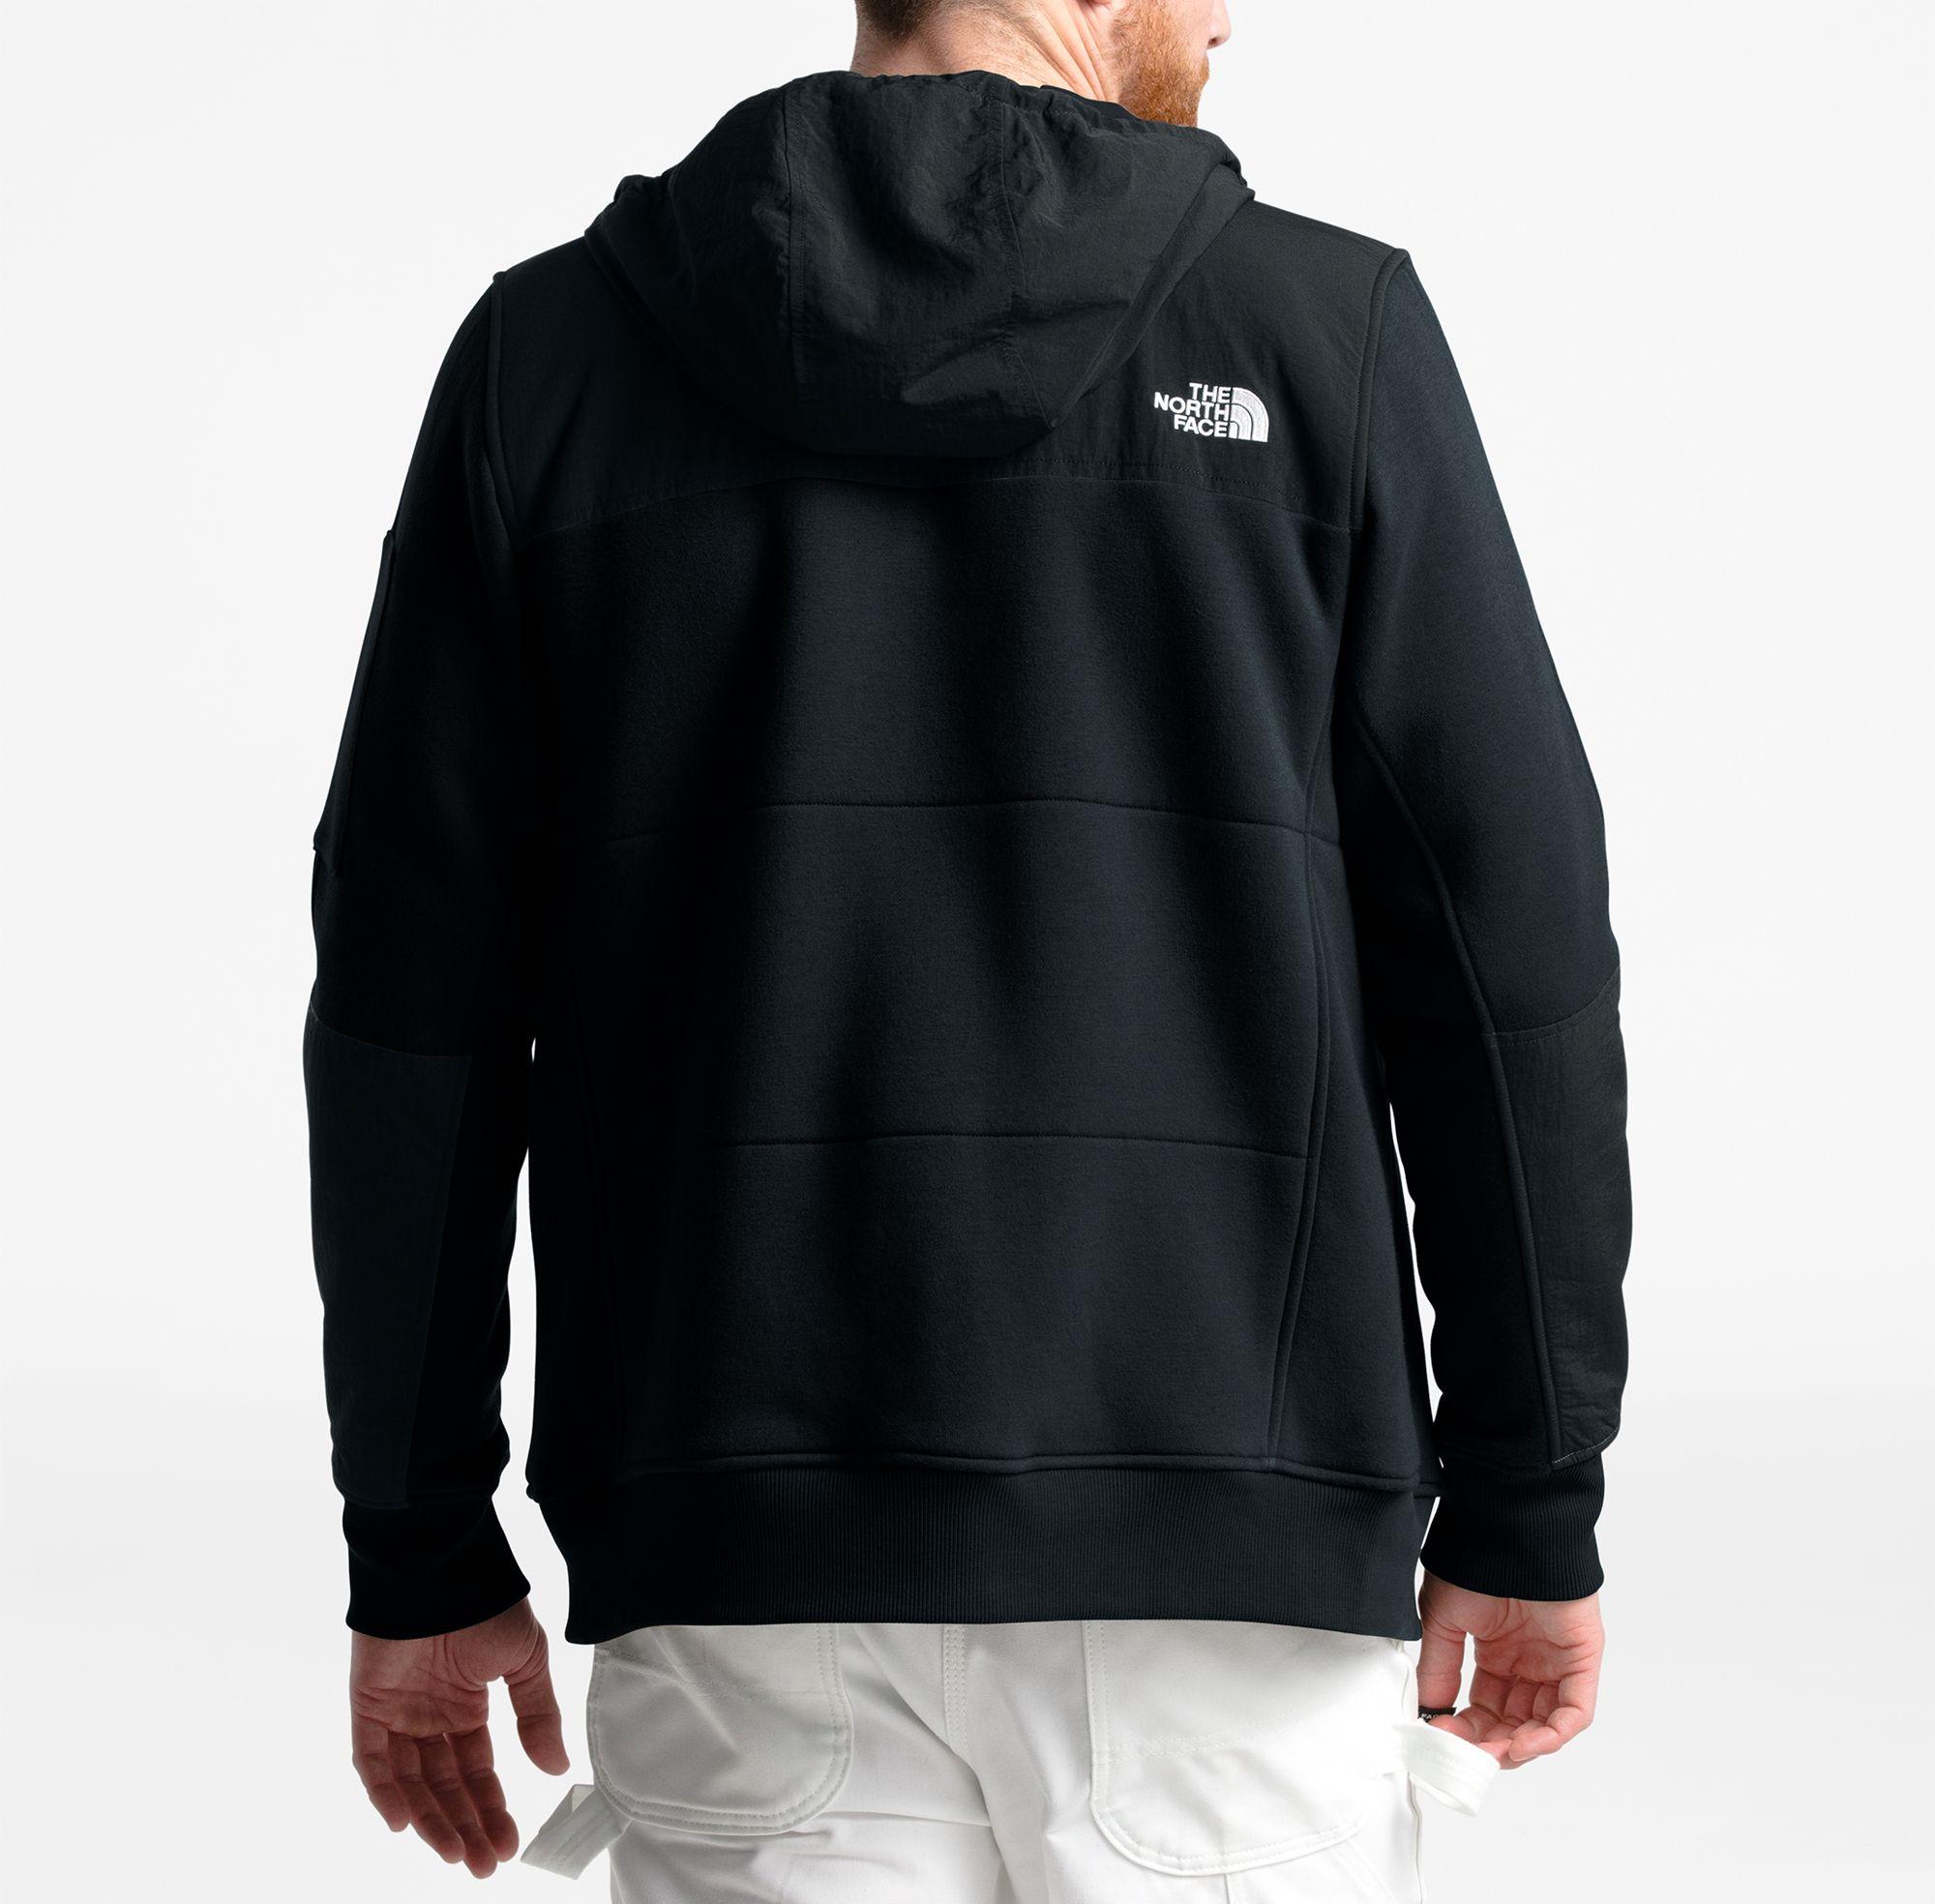 The North Face Sherpa-lined Rivington Fleece Jacket in Black for Men - Lyst